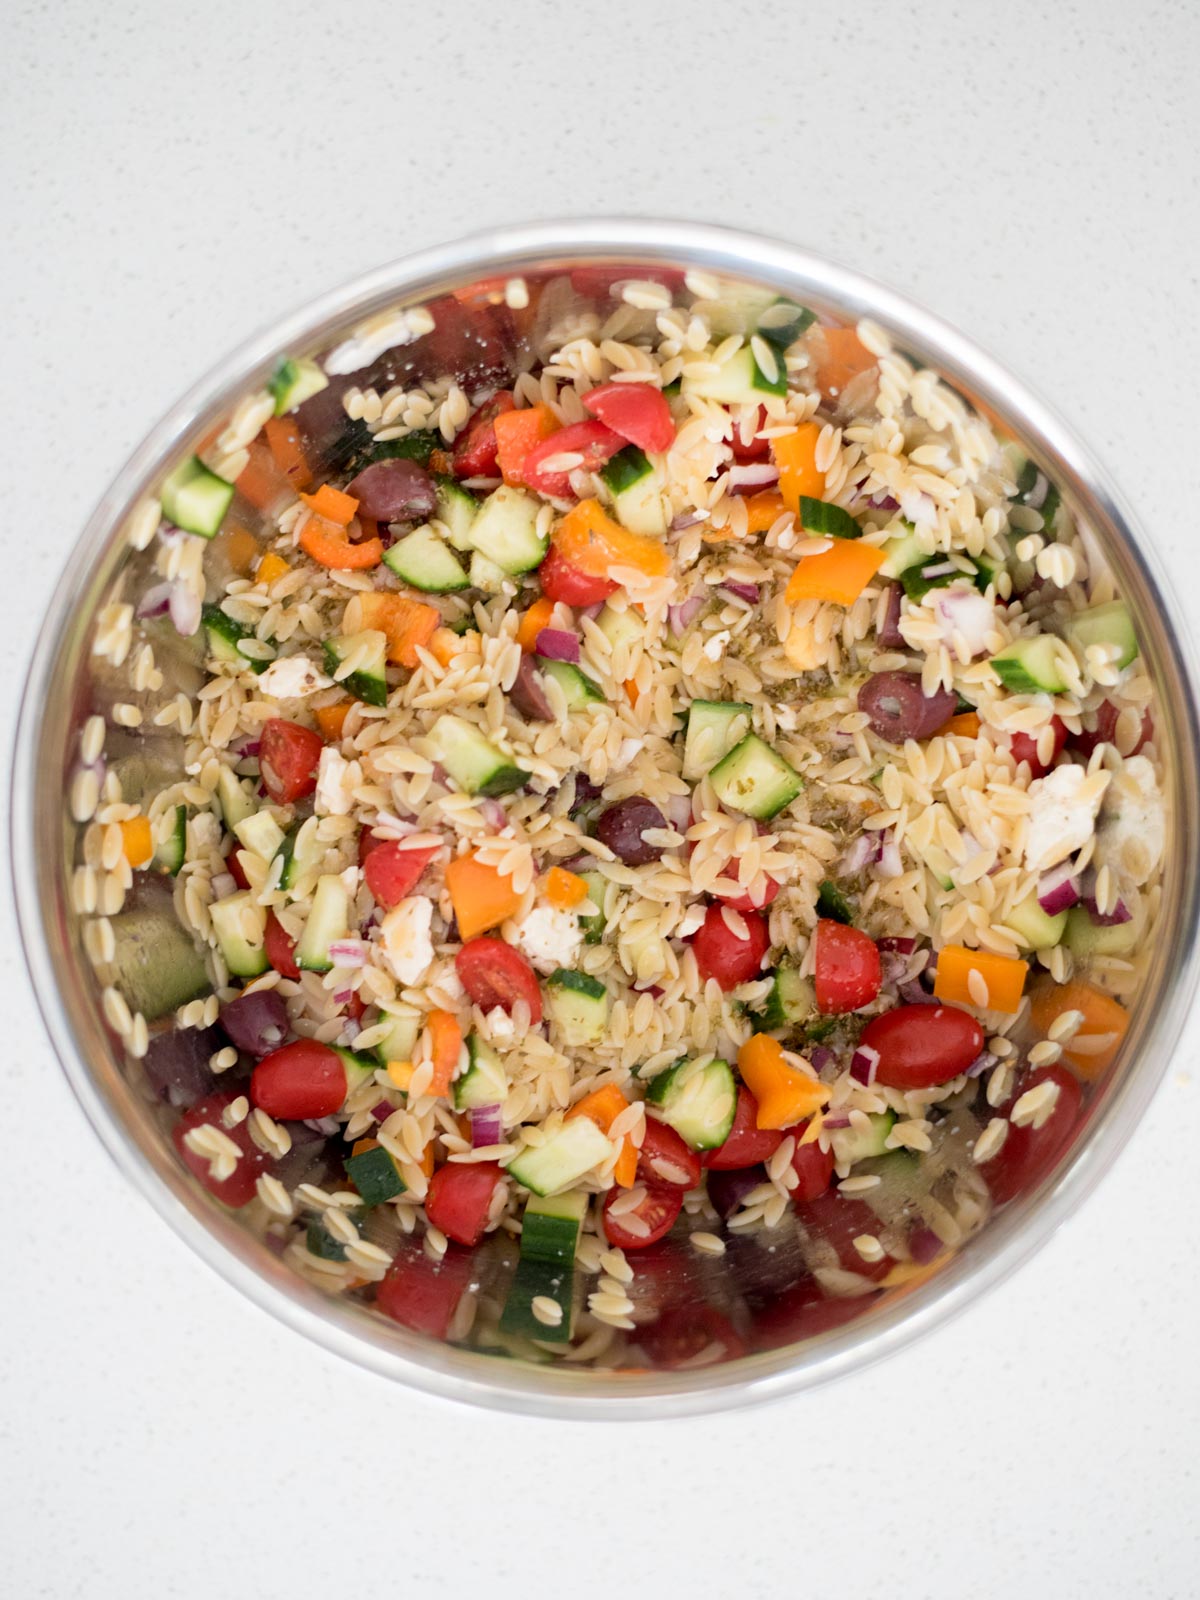 dressing added to the mixing bowl with the vegetables and orzo